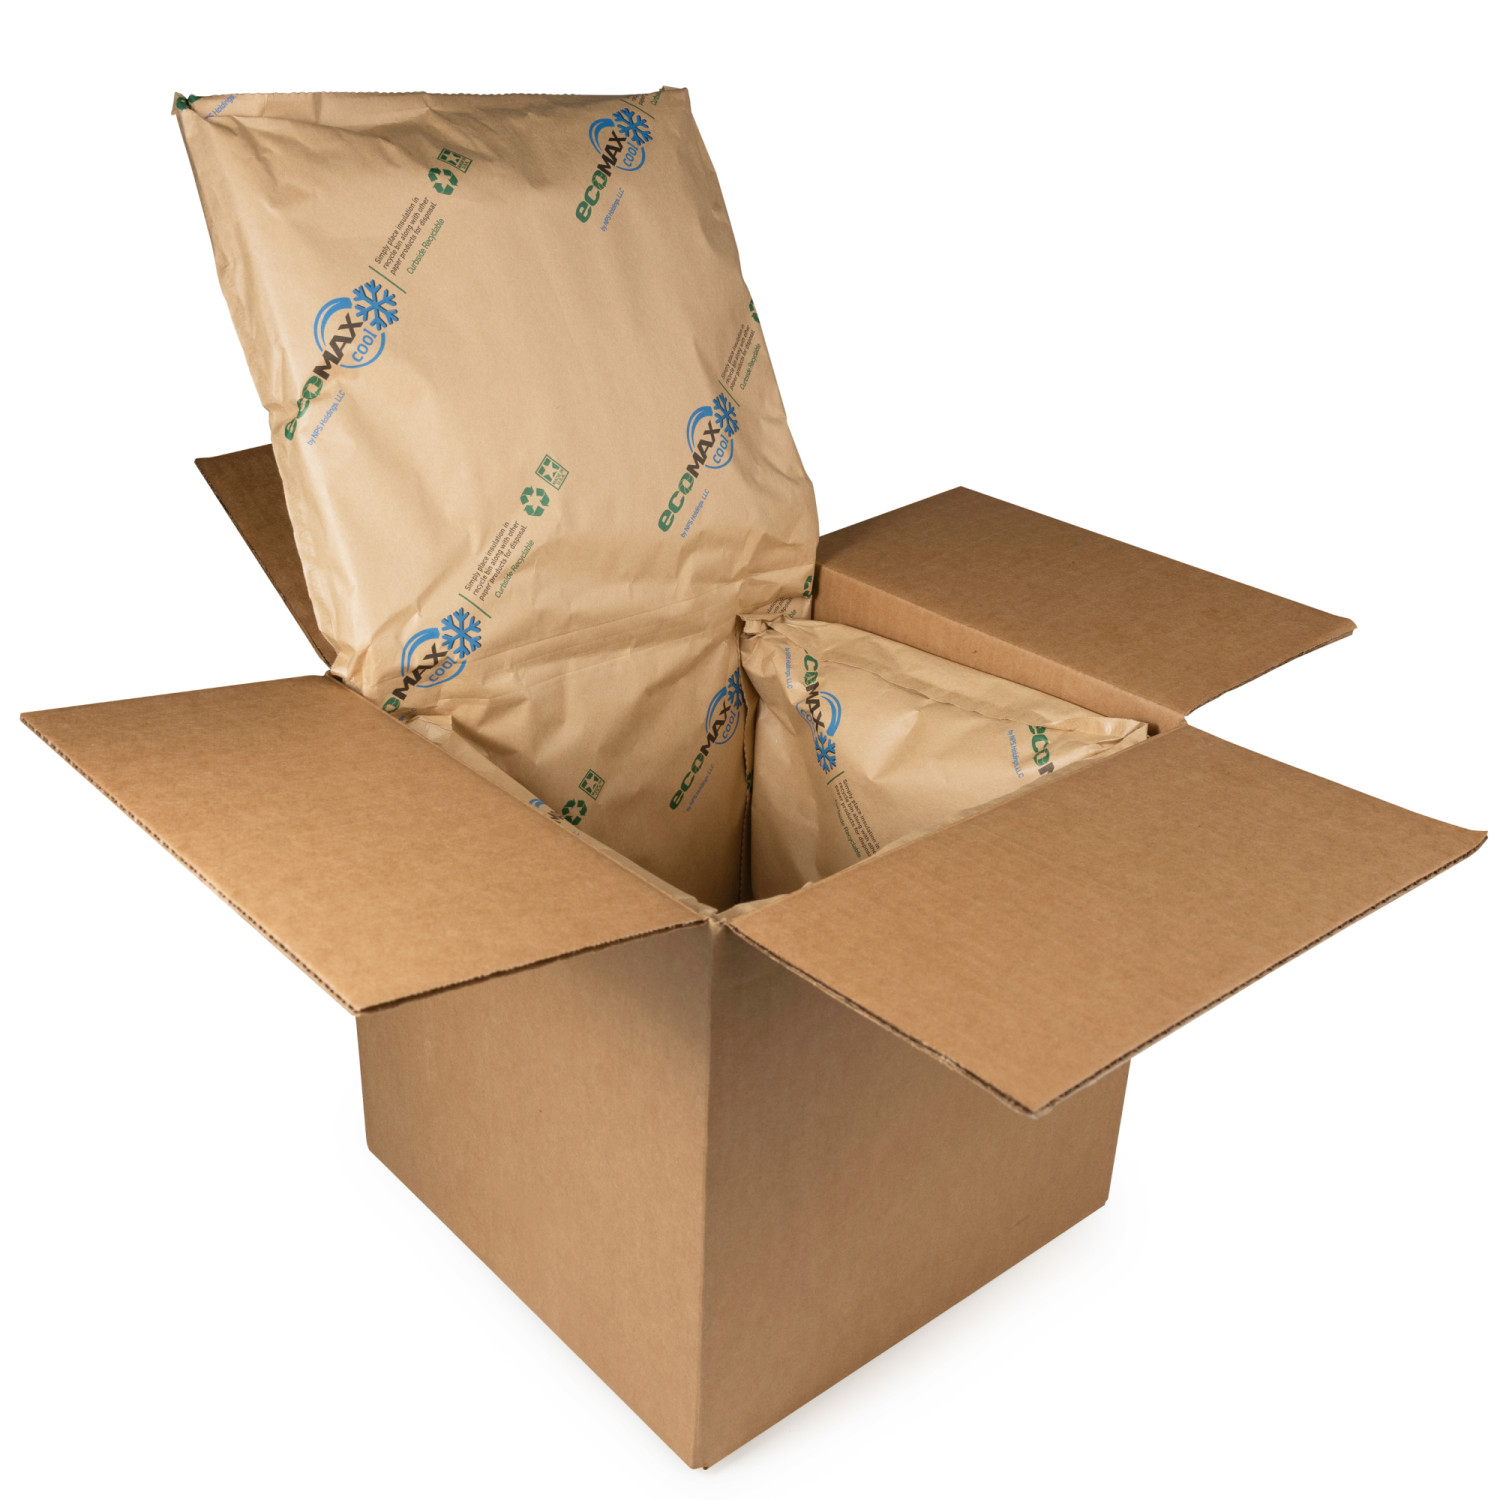 Dropship Foil Insulated Box Liners 12 X 10 X 9; Pack Of 25